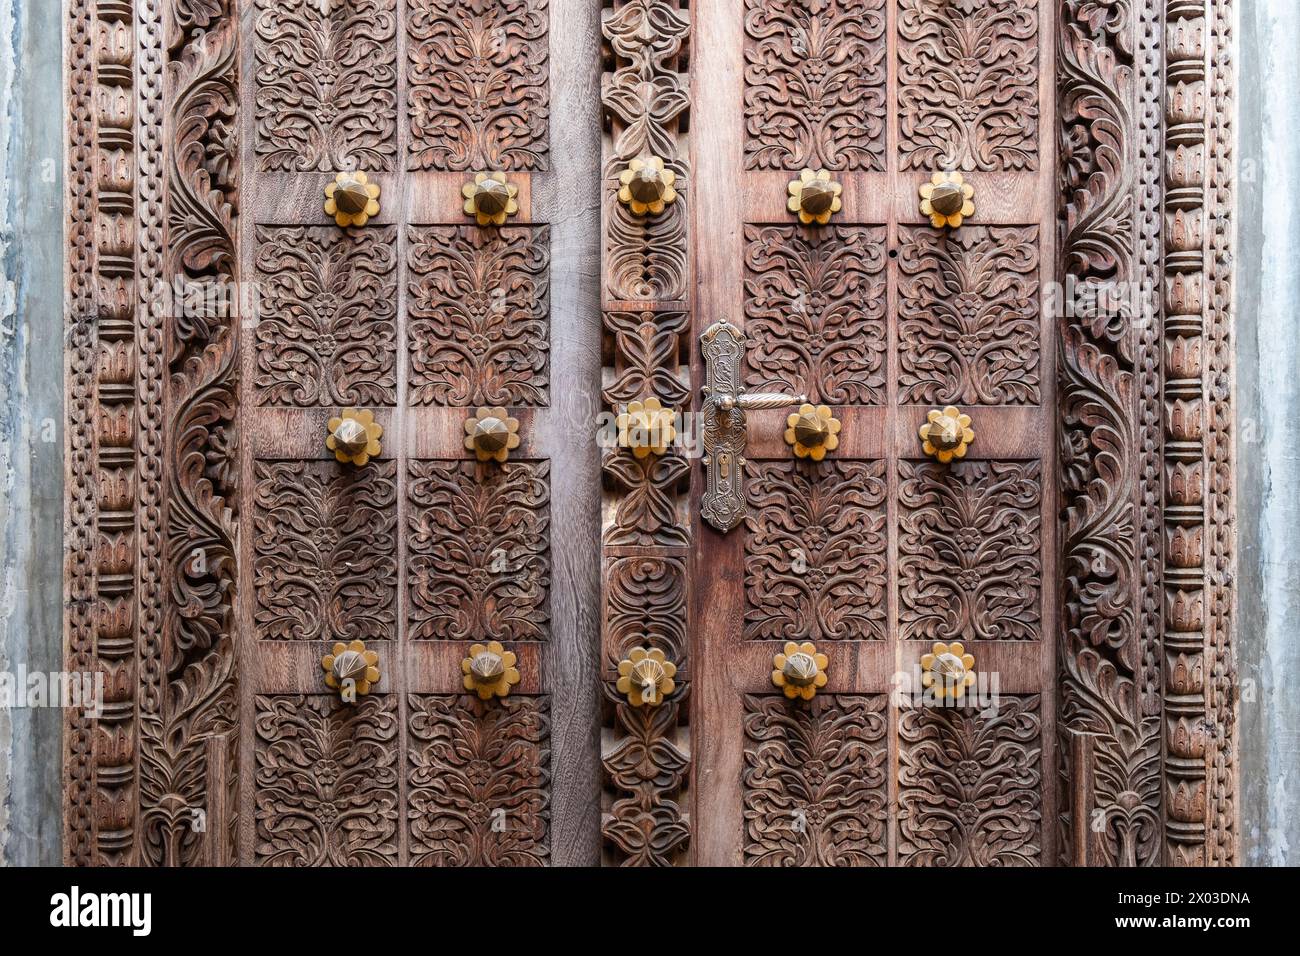 An Arab culture inspired elaborately carved door with an ornate door handle at the entrance to a building in Zanzibar, Tanzania. Stock Photo